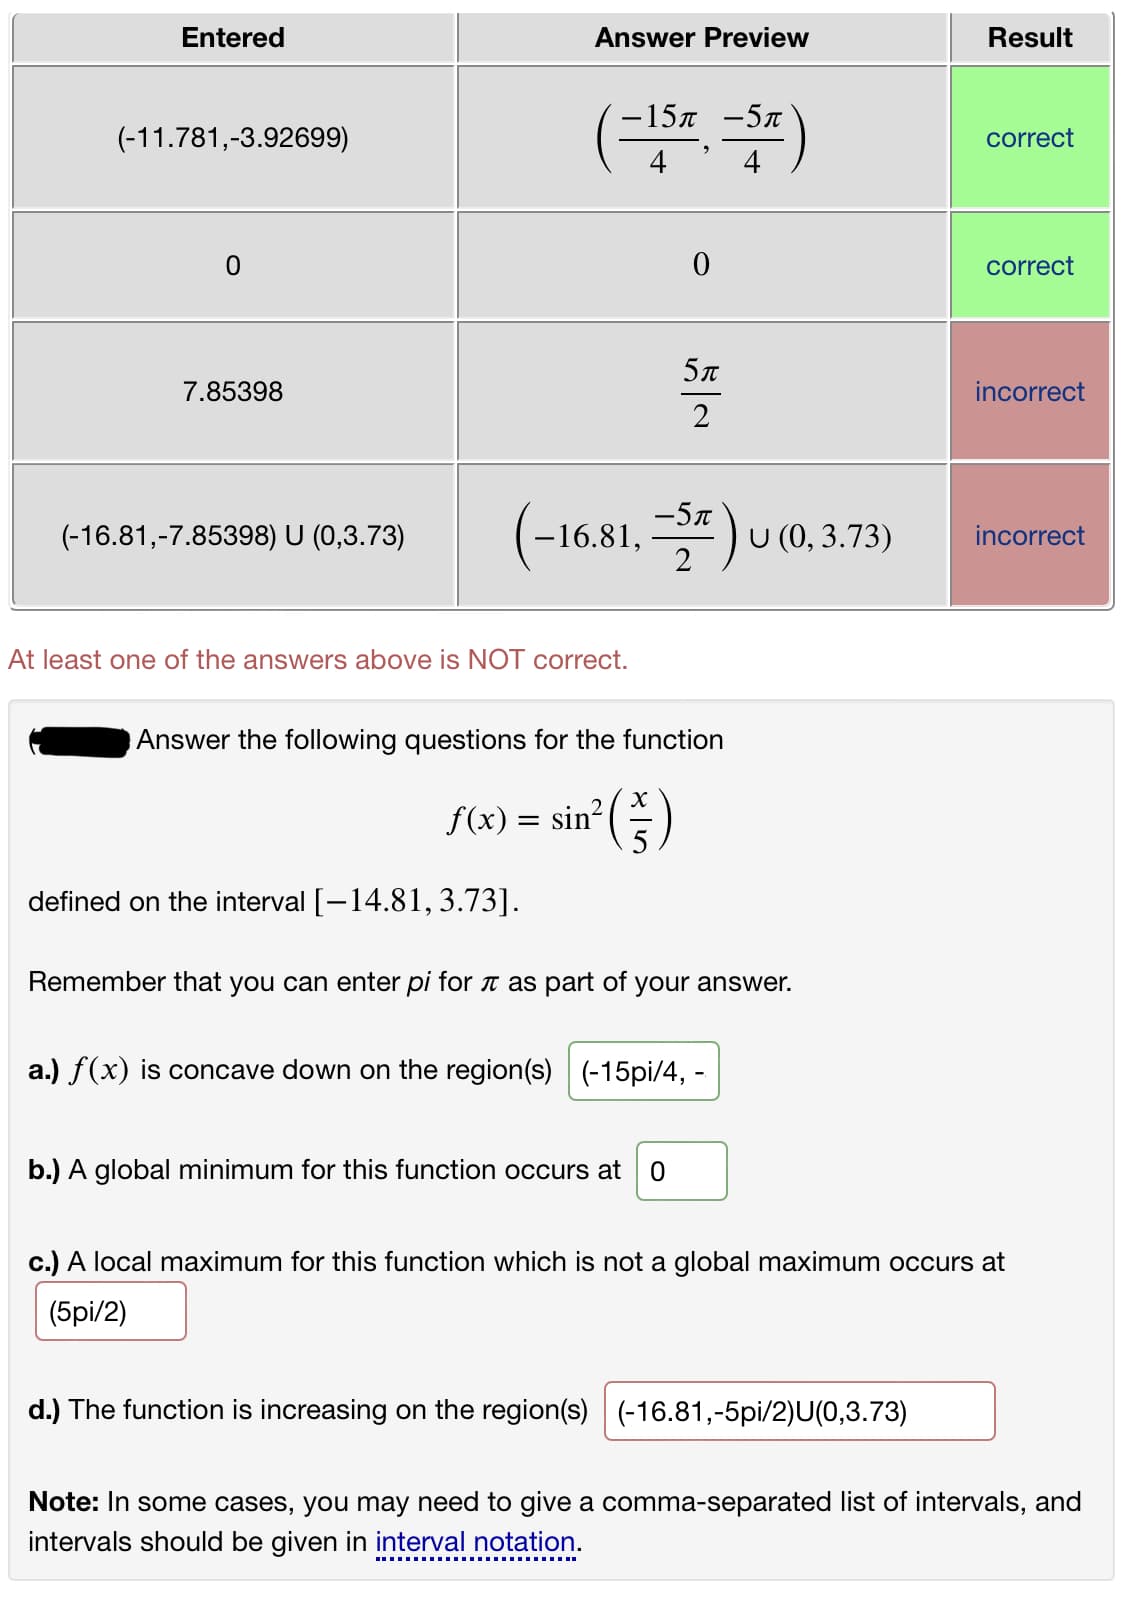 Entered
Answer Preview
Result
-15л —5л
(-11.781,-3.92699)
correct
4
correct
5л
7.85398
incorrect
2
( *) u
-5n
-16.81,
U (0, 3.73)
(-16.81,-7.85398) U (0,3.73)
incorrect
At least one of the answers above is NOT correct.
Answer the following questions for the function
X
f(x) = sin?
defined on the interval [-14.81,3.73].
Remember that you can enter pi for t as part of your answer.
a.) f(x) is concave down on the region(s) (-15pi/4, -
b.) A global minimum for this function occurs at
c.) A local maximum for this function which is not a global maximum occurs at
(5pi/2)
d.) The function is increasing on the region(s)
(-16.81,-5pi/2)U(0,3.73)
Note: In some cases, you may need to give a comma-separated list of intervals, and
intervals should be given in interval notation.
